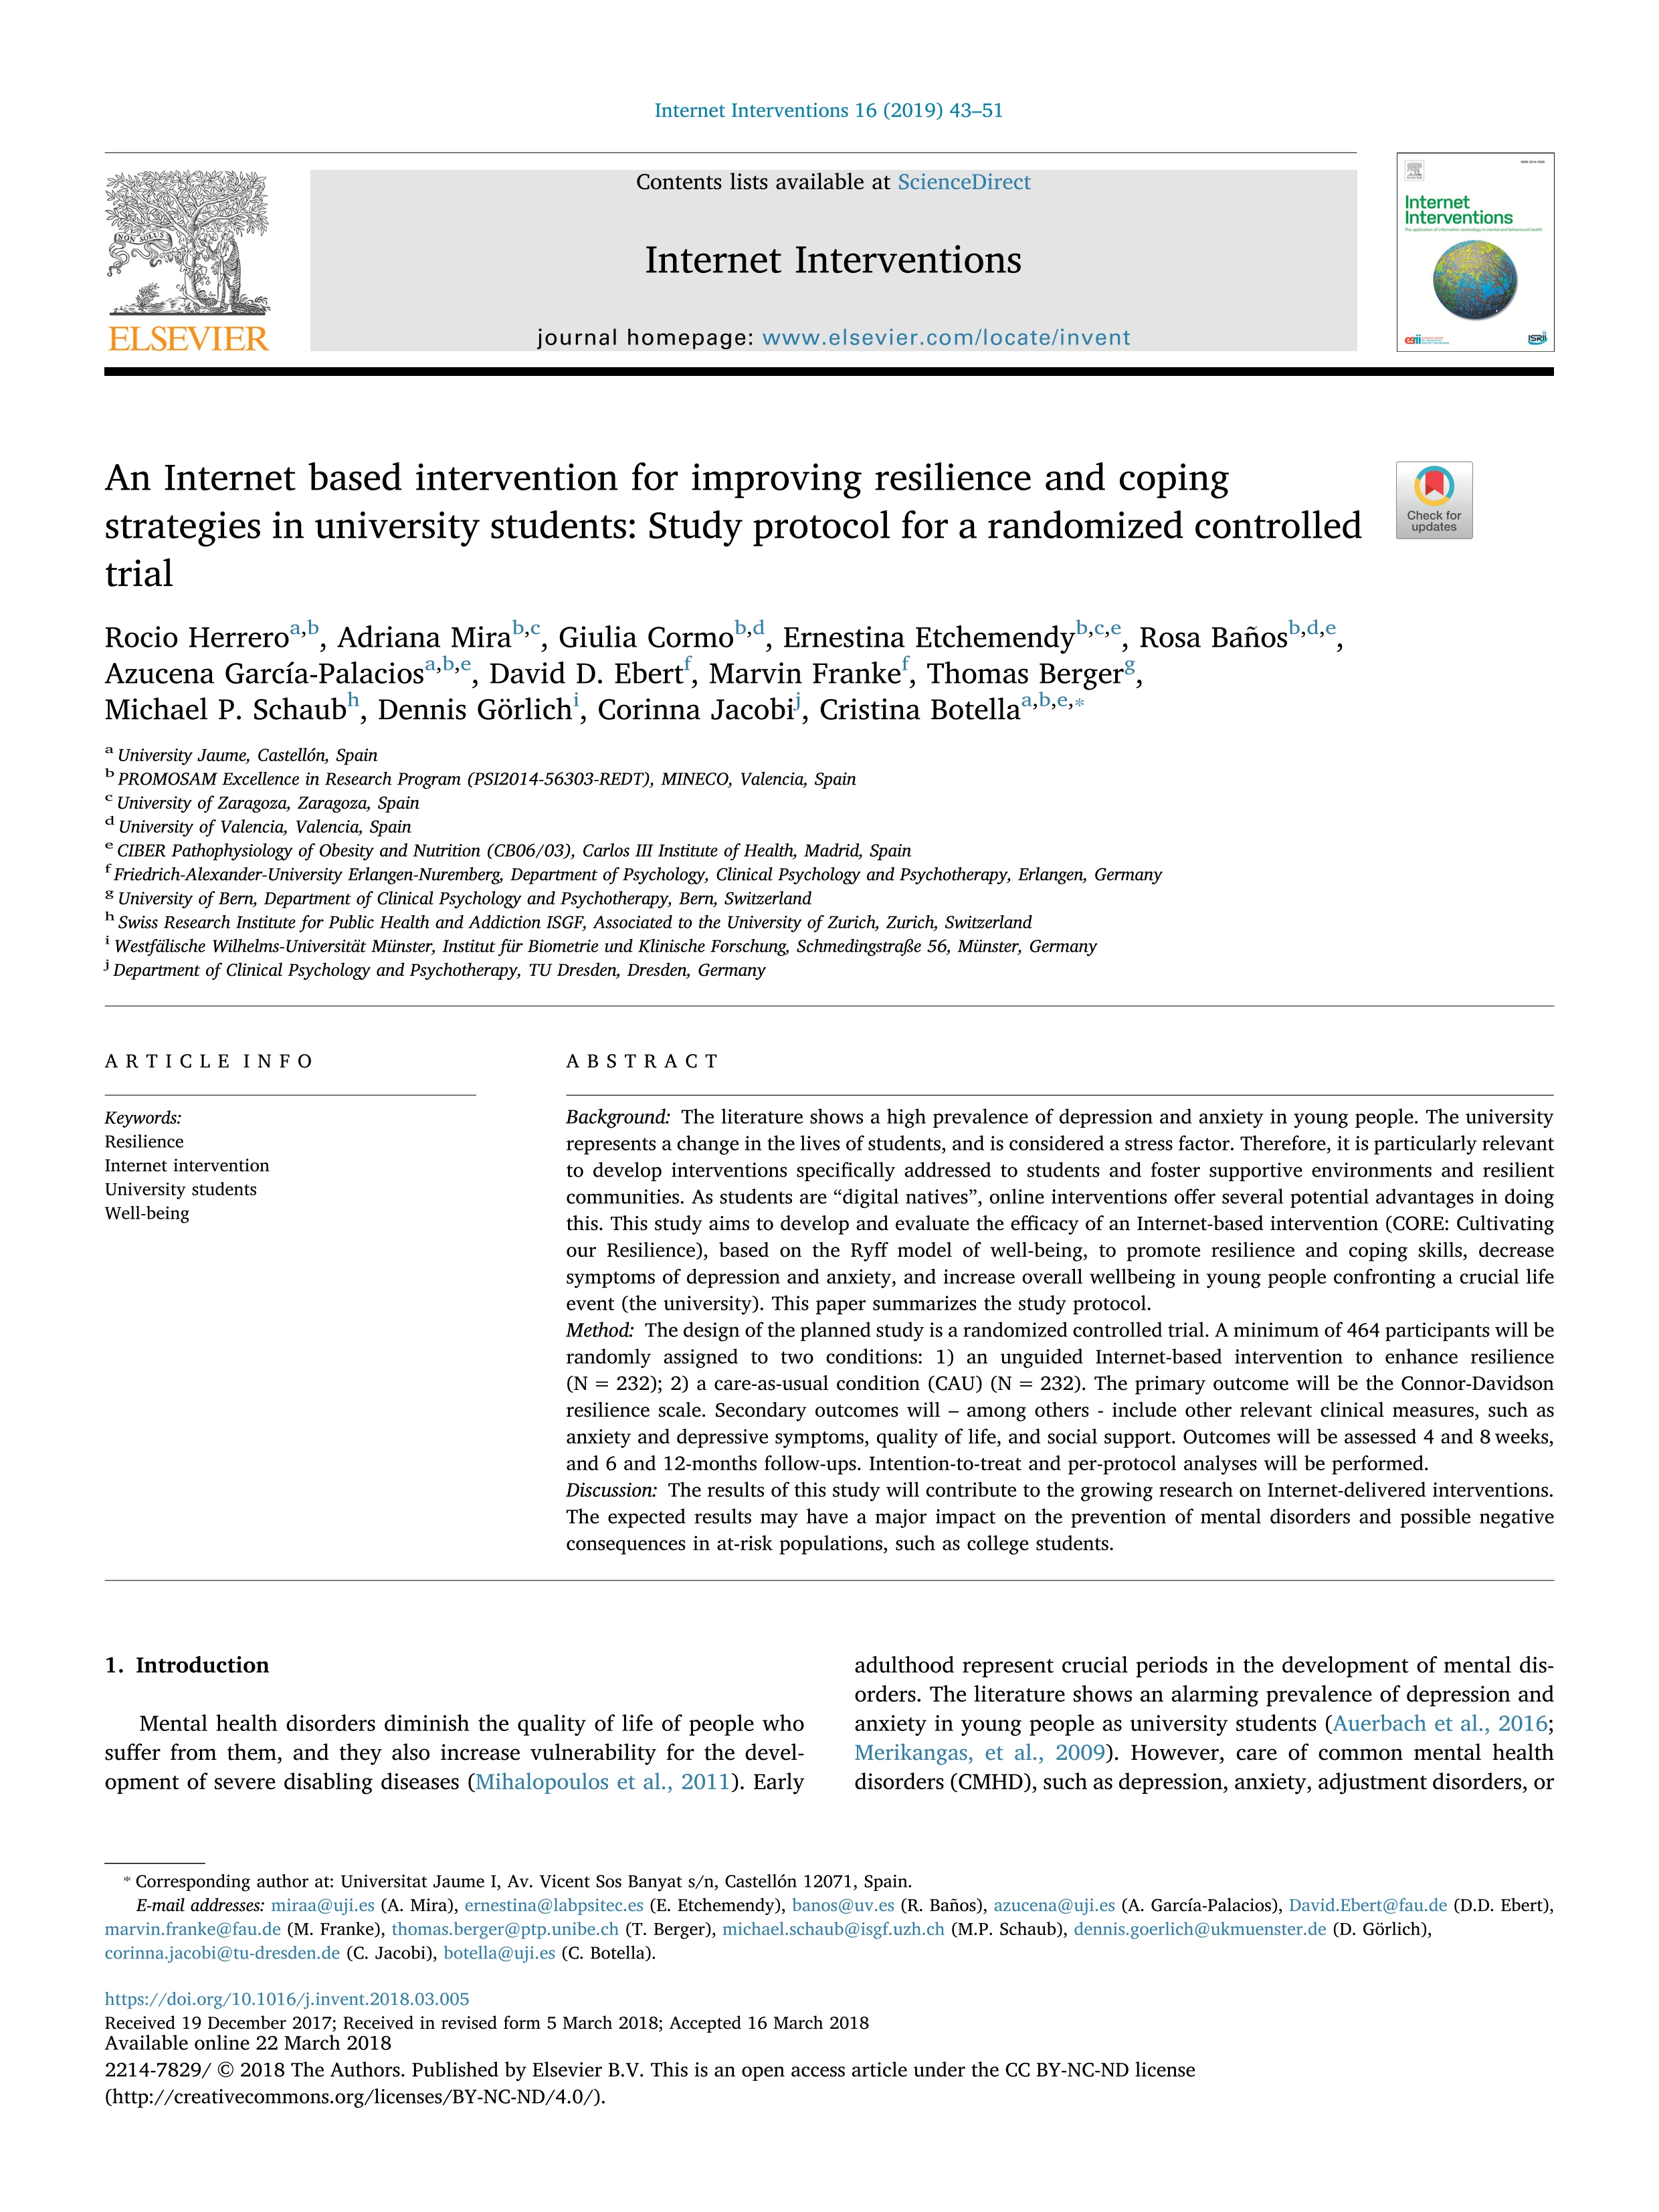 An Internet based intervention for improving resilience and coping strategies in university students: Study protocol for a randomized controlled trial